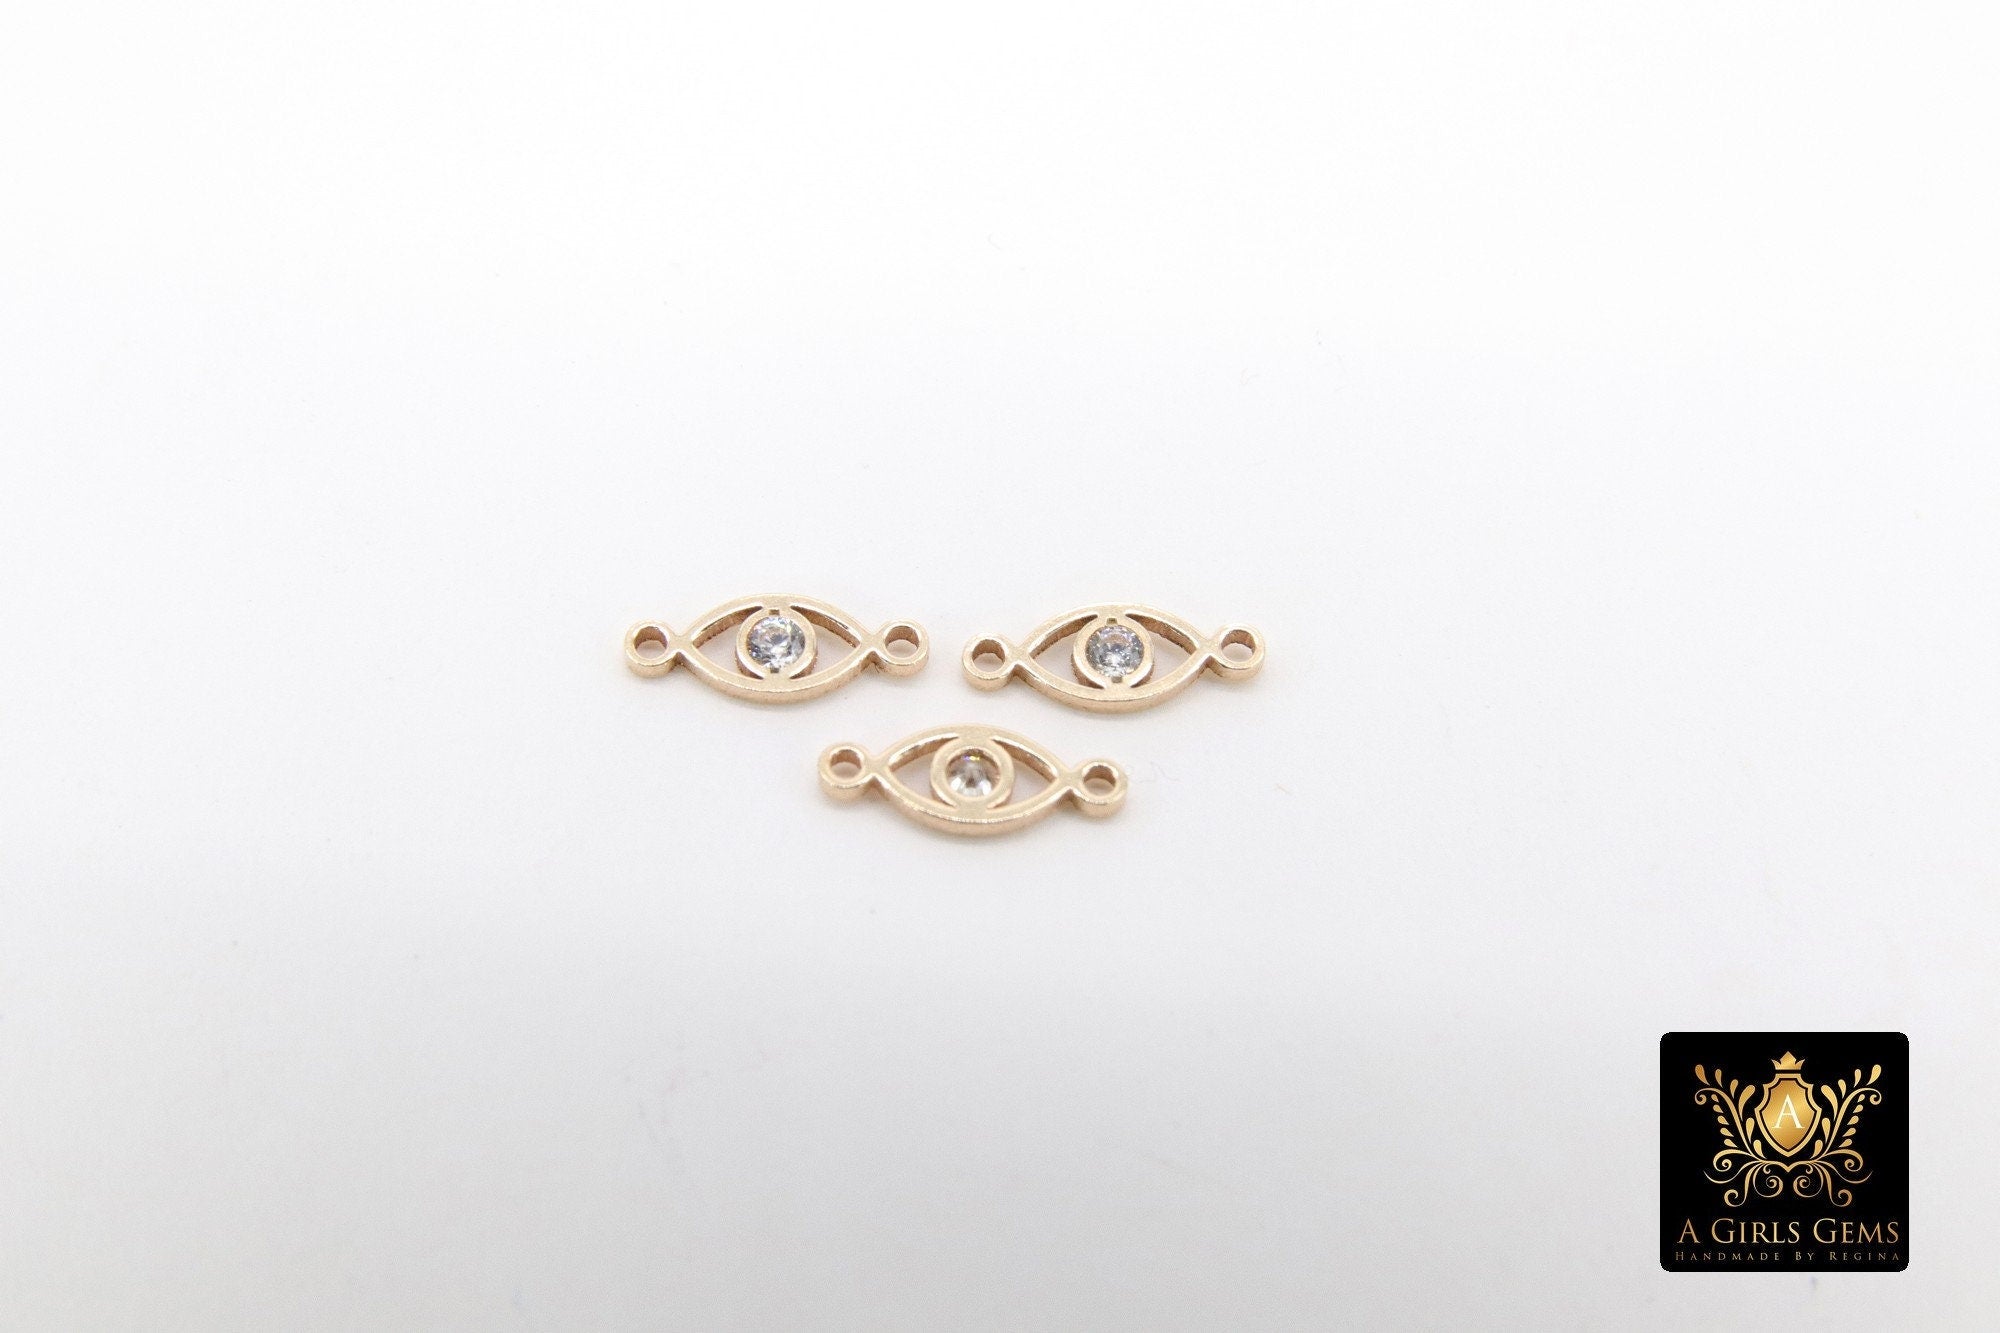 14 K Gold Filled Evil Eye Connector, CZ Micro Pave Evil Eyes Link #3453, Tiny Minimalist Permanent Jewelry, 3 x 9 mm